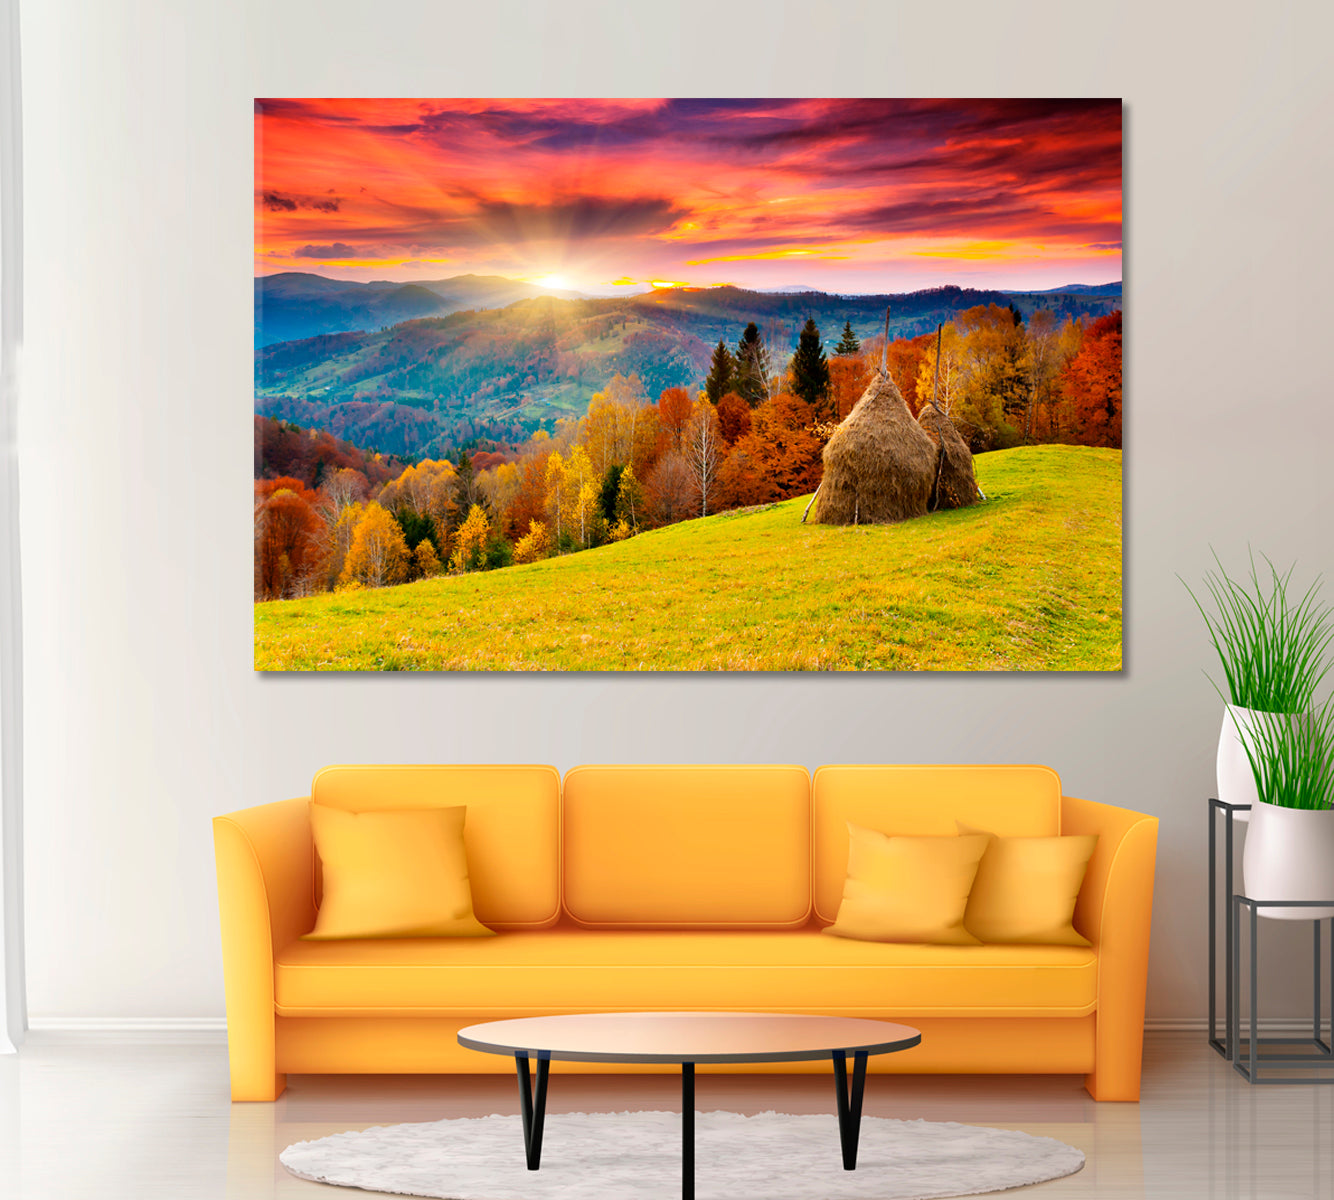 Autumn Carpathian Mountains Landscape with Colorful Forest Canvas Print ArtLexy 1 Panel 24"x16" inches 